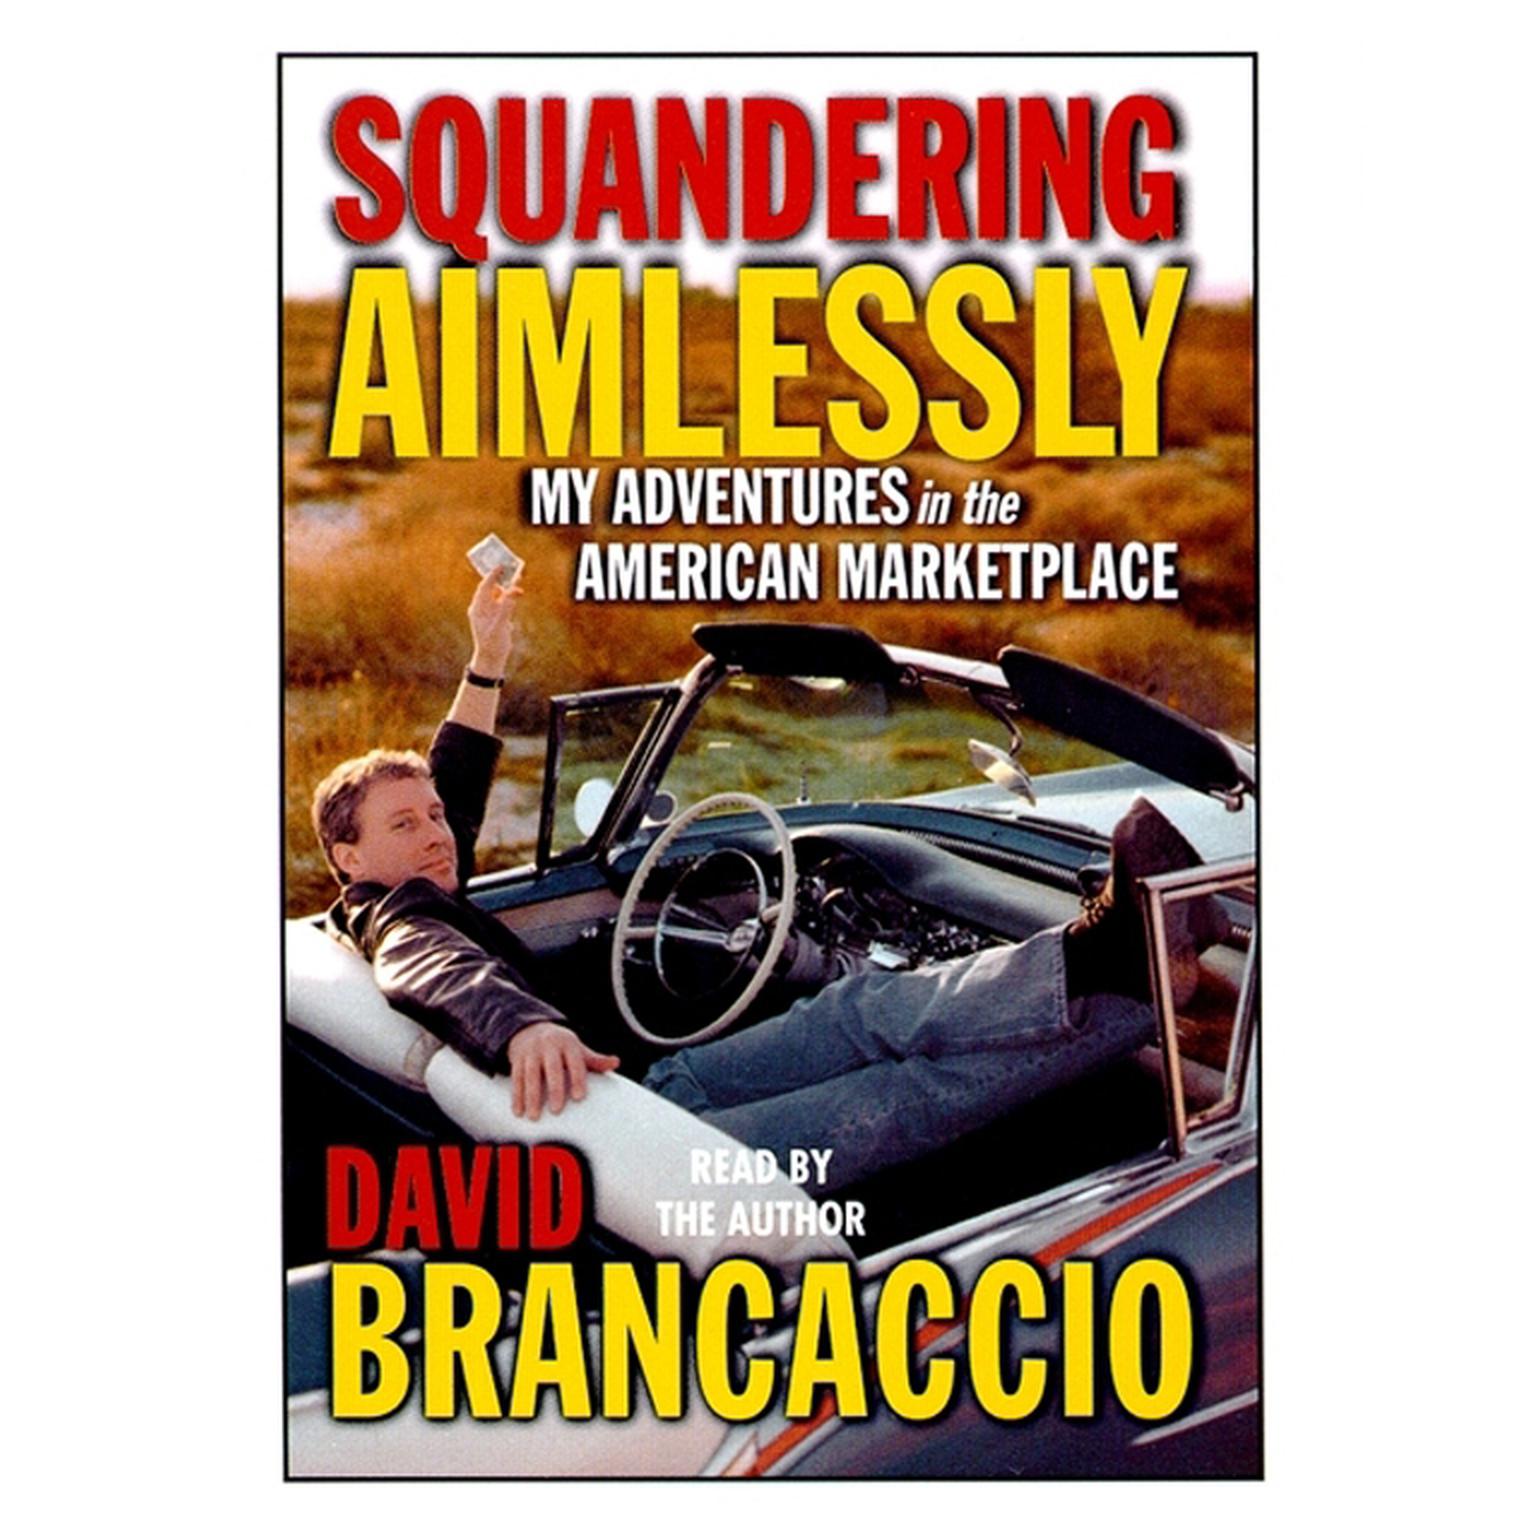 Squandering Aimlessly (Abridged): My Adventures in the American Marketplace Audiobook, by David Brancaccio